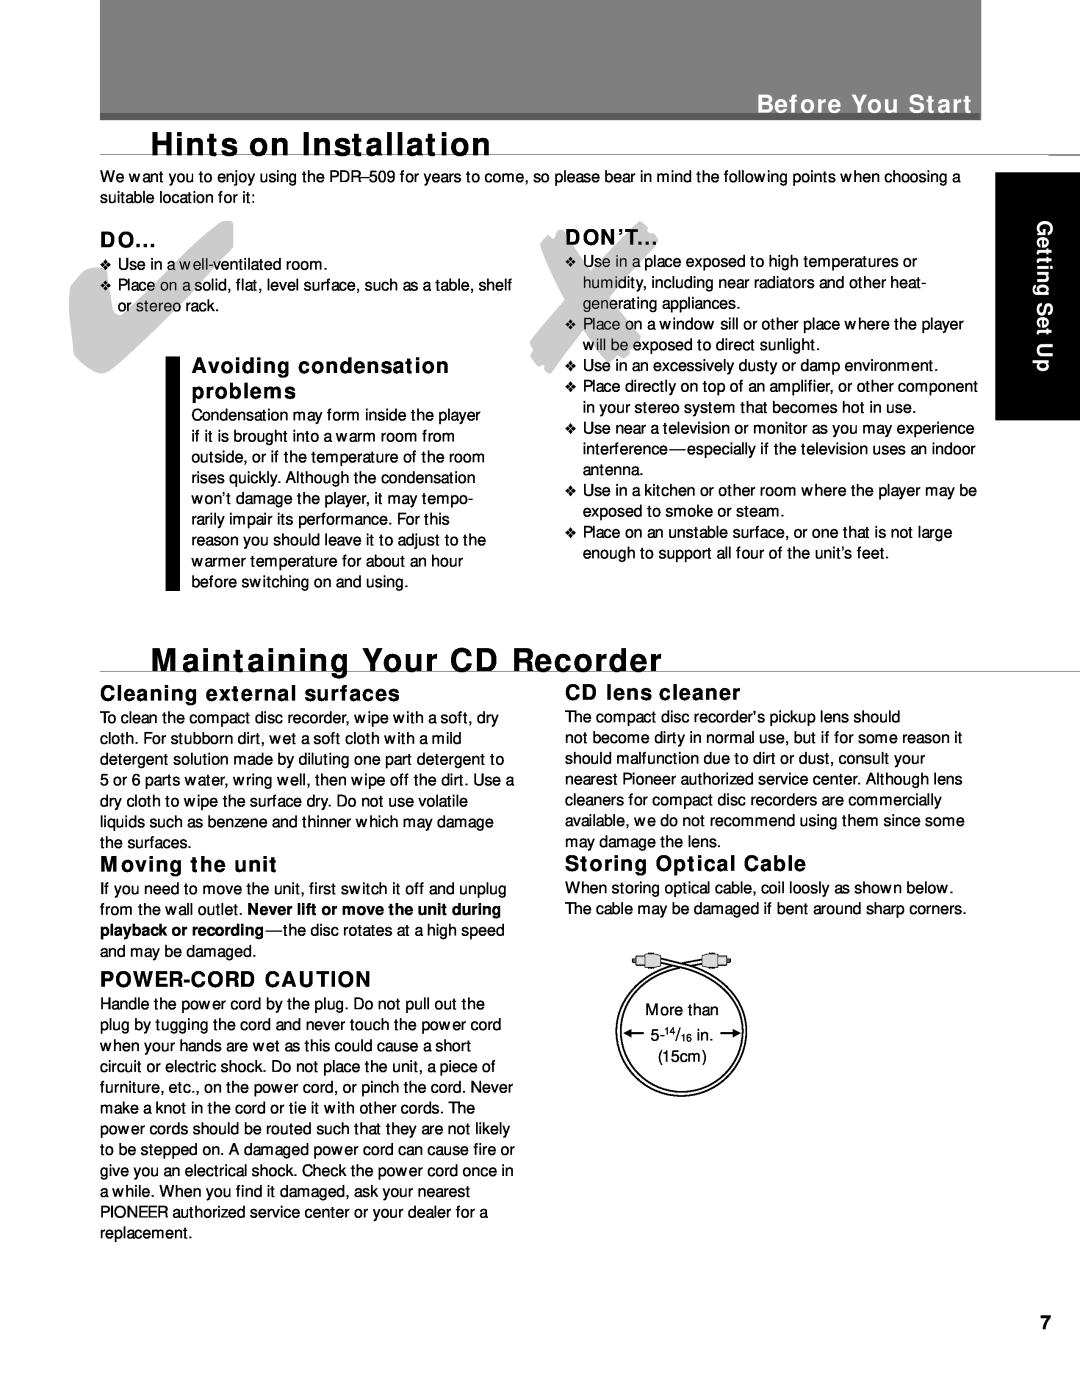 Pioneer PDR-509 manual Hints on Installation, Maintaining Your CD Recorder, Avoiding condensation problems, Getting Set Up 